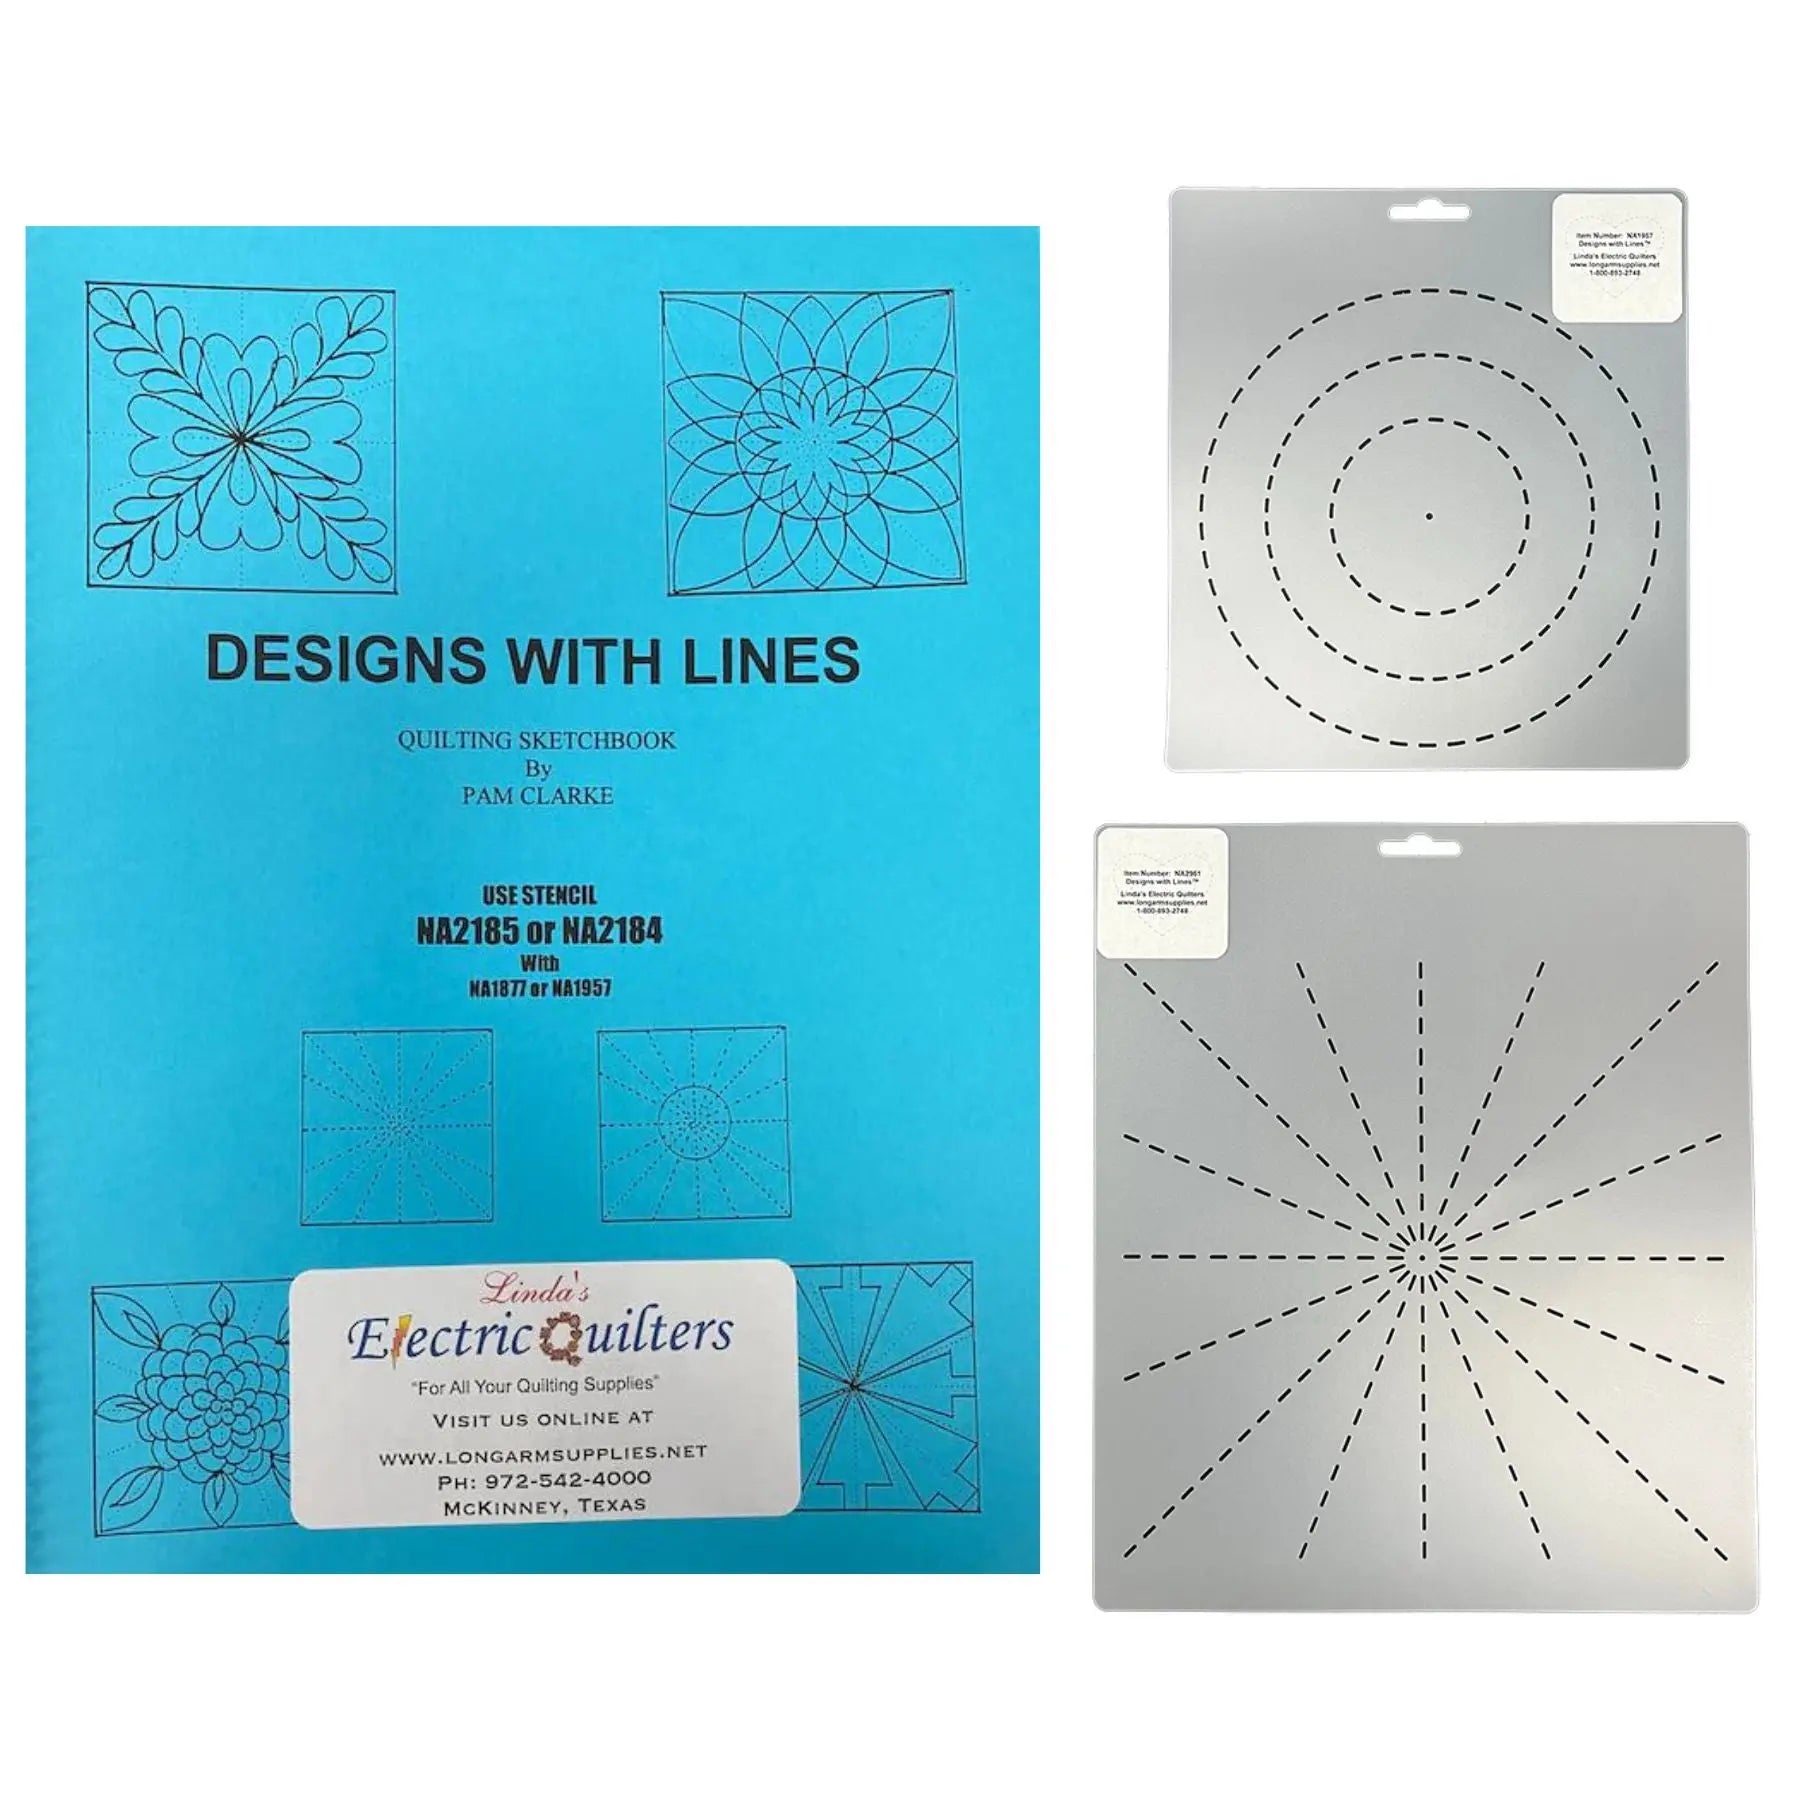 Spider Web Book & Stencil Kit - Linda's Electric Quilters